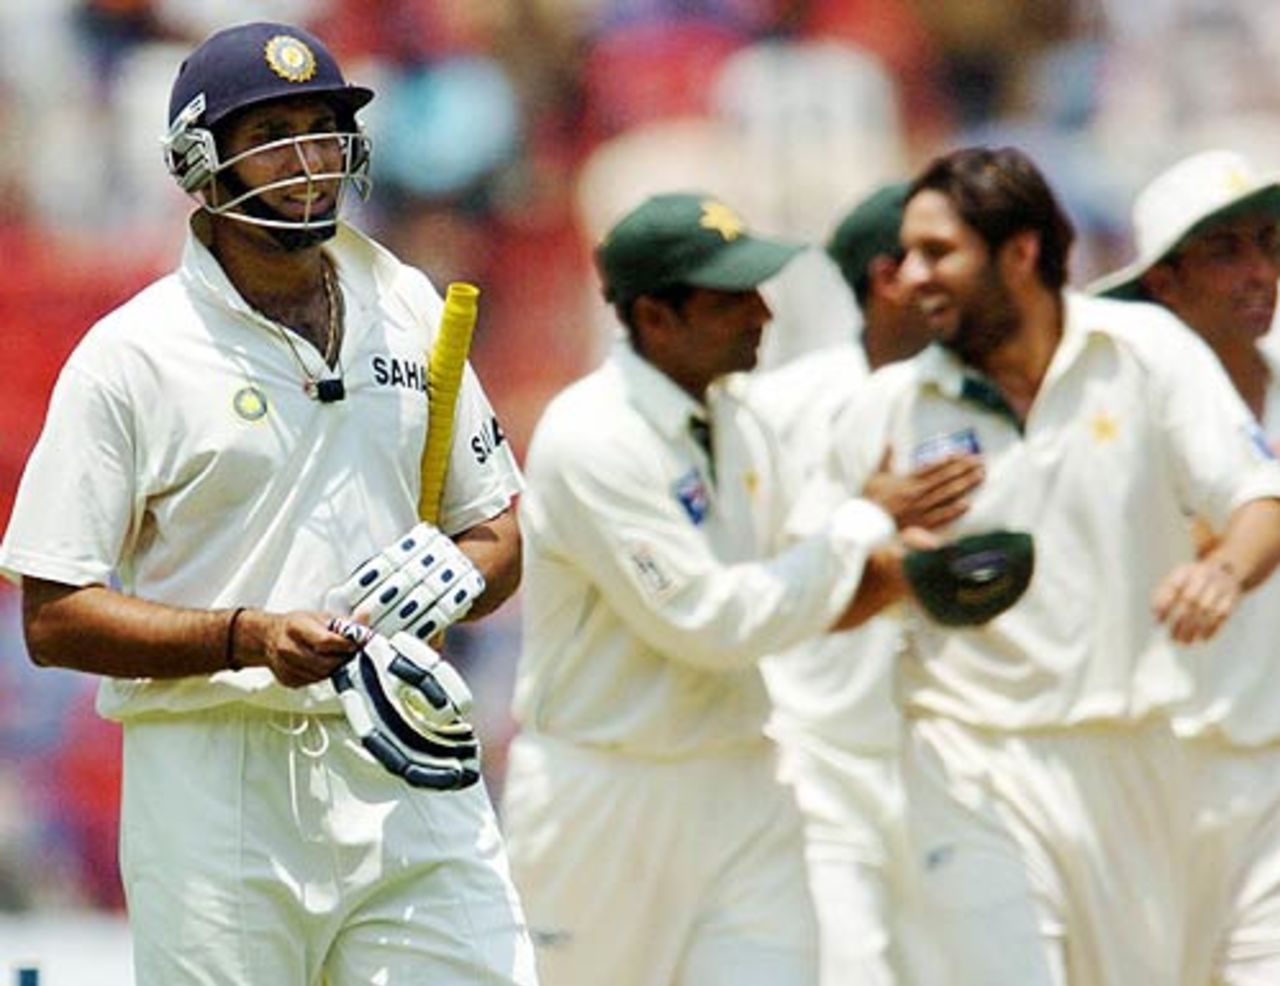 Shahid Afridi finally wrapped up the Indian innings, leaving VVS Laxman high and dry, India v Pakistan, 3rd Test, Bangalore, 4th day, March 27, 2005